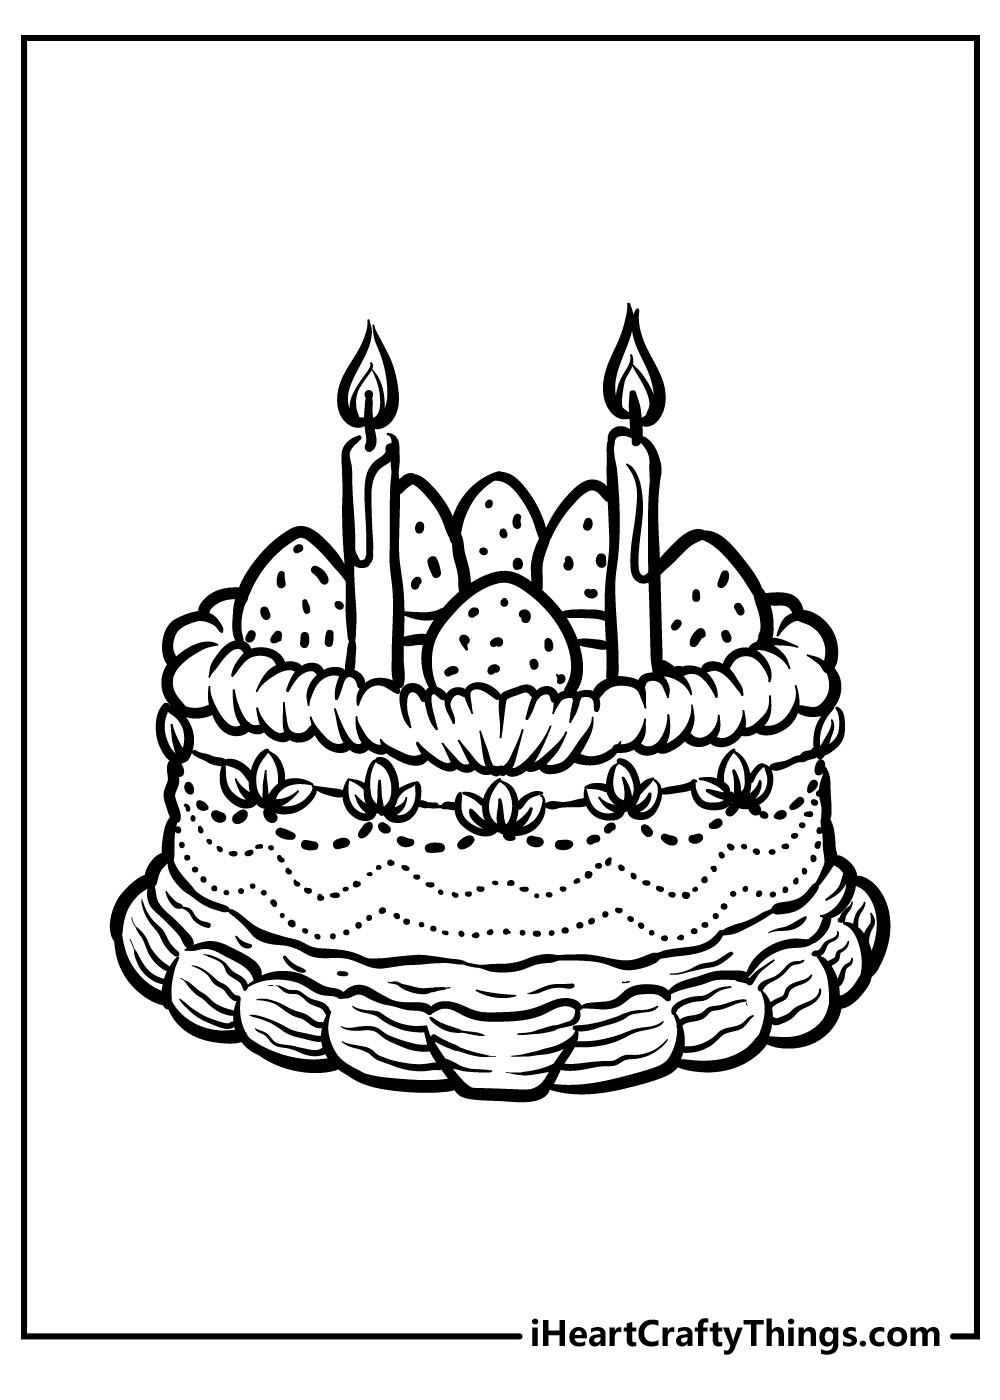 Cake coloring pages free printables